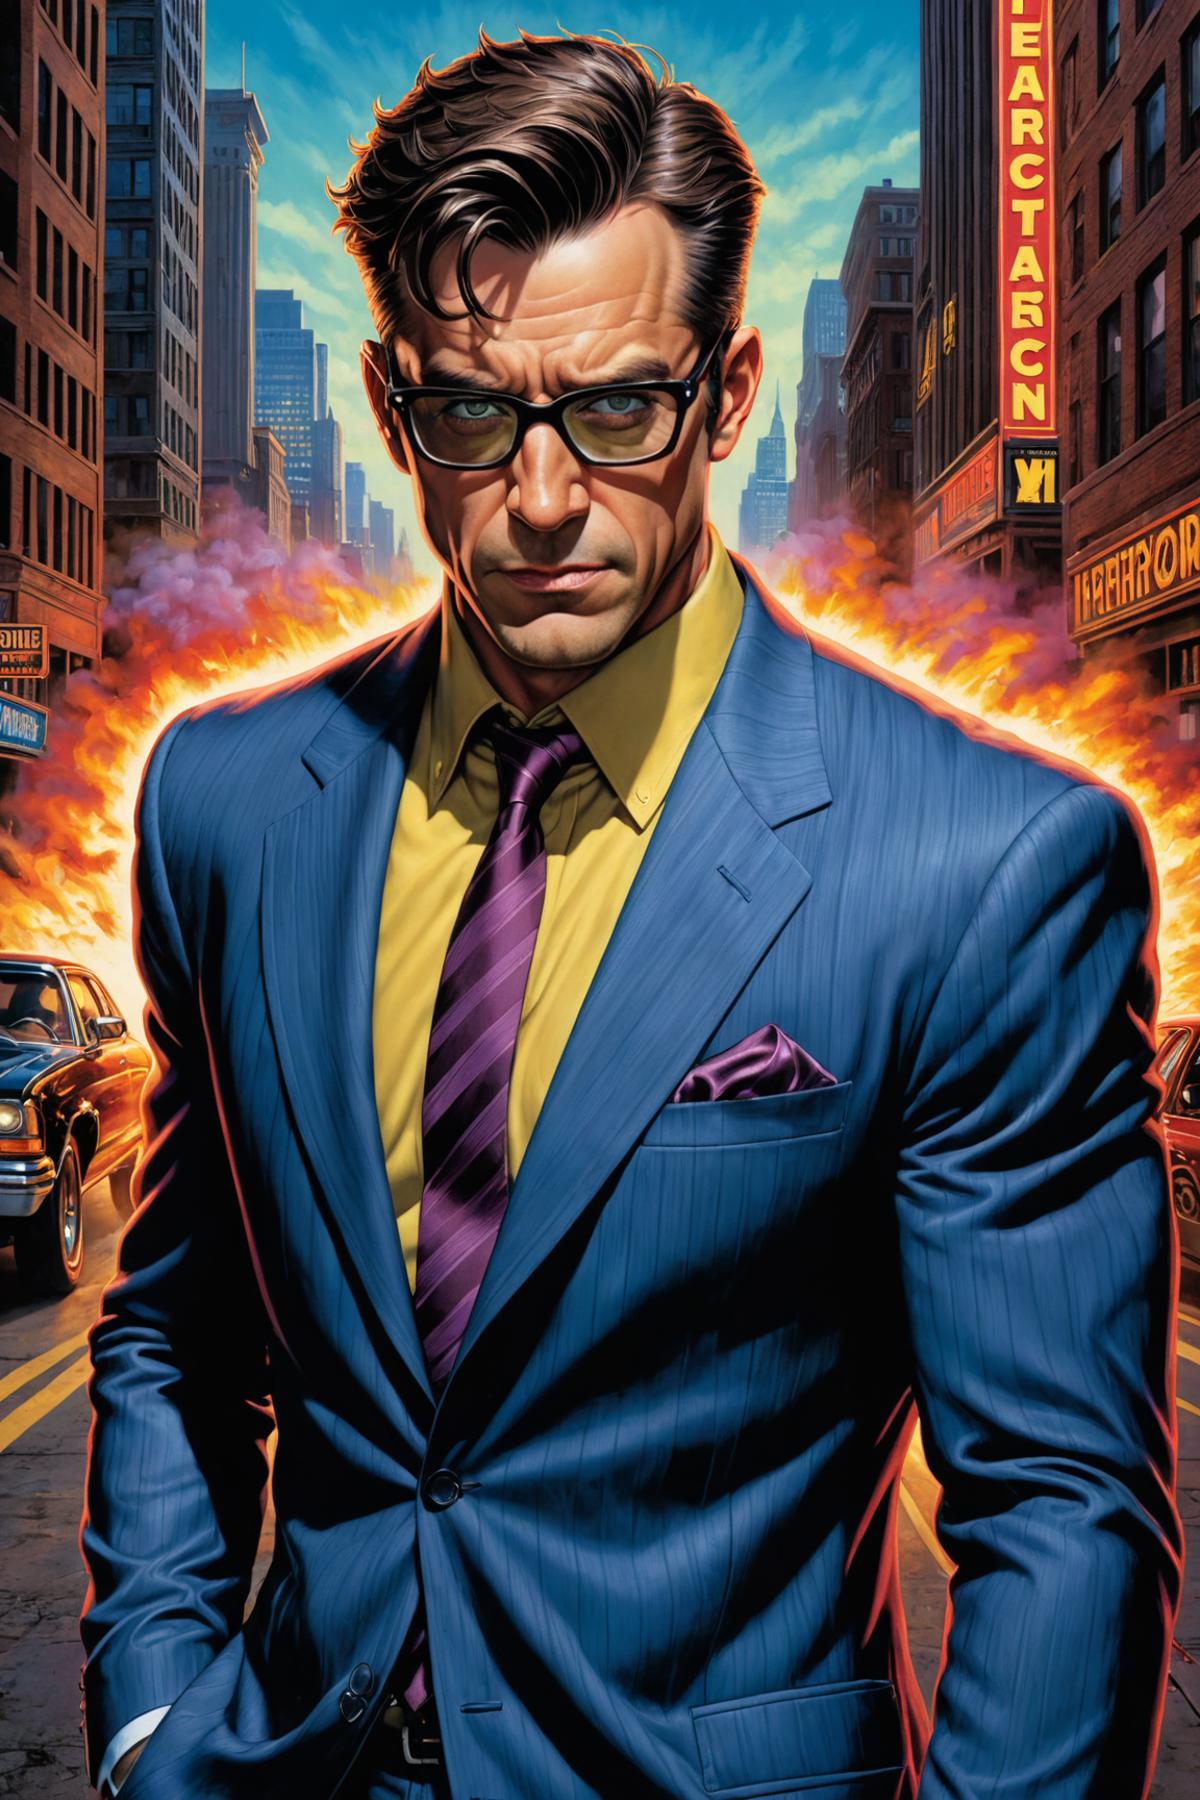 A man in a blue suit and yellow shirt with a purple tie stands on a street.